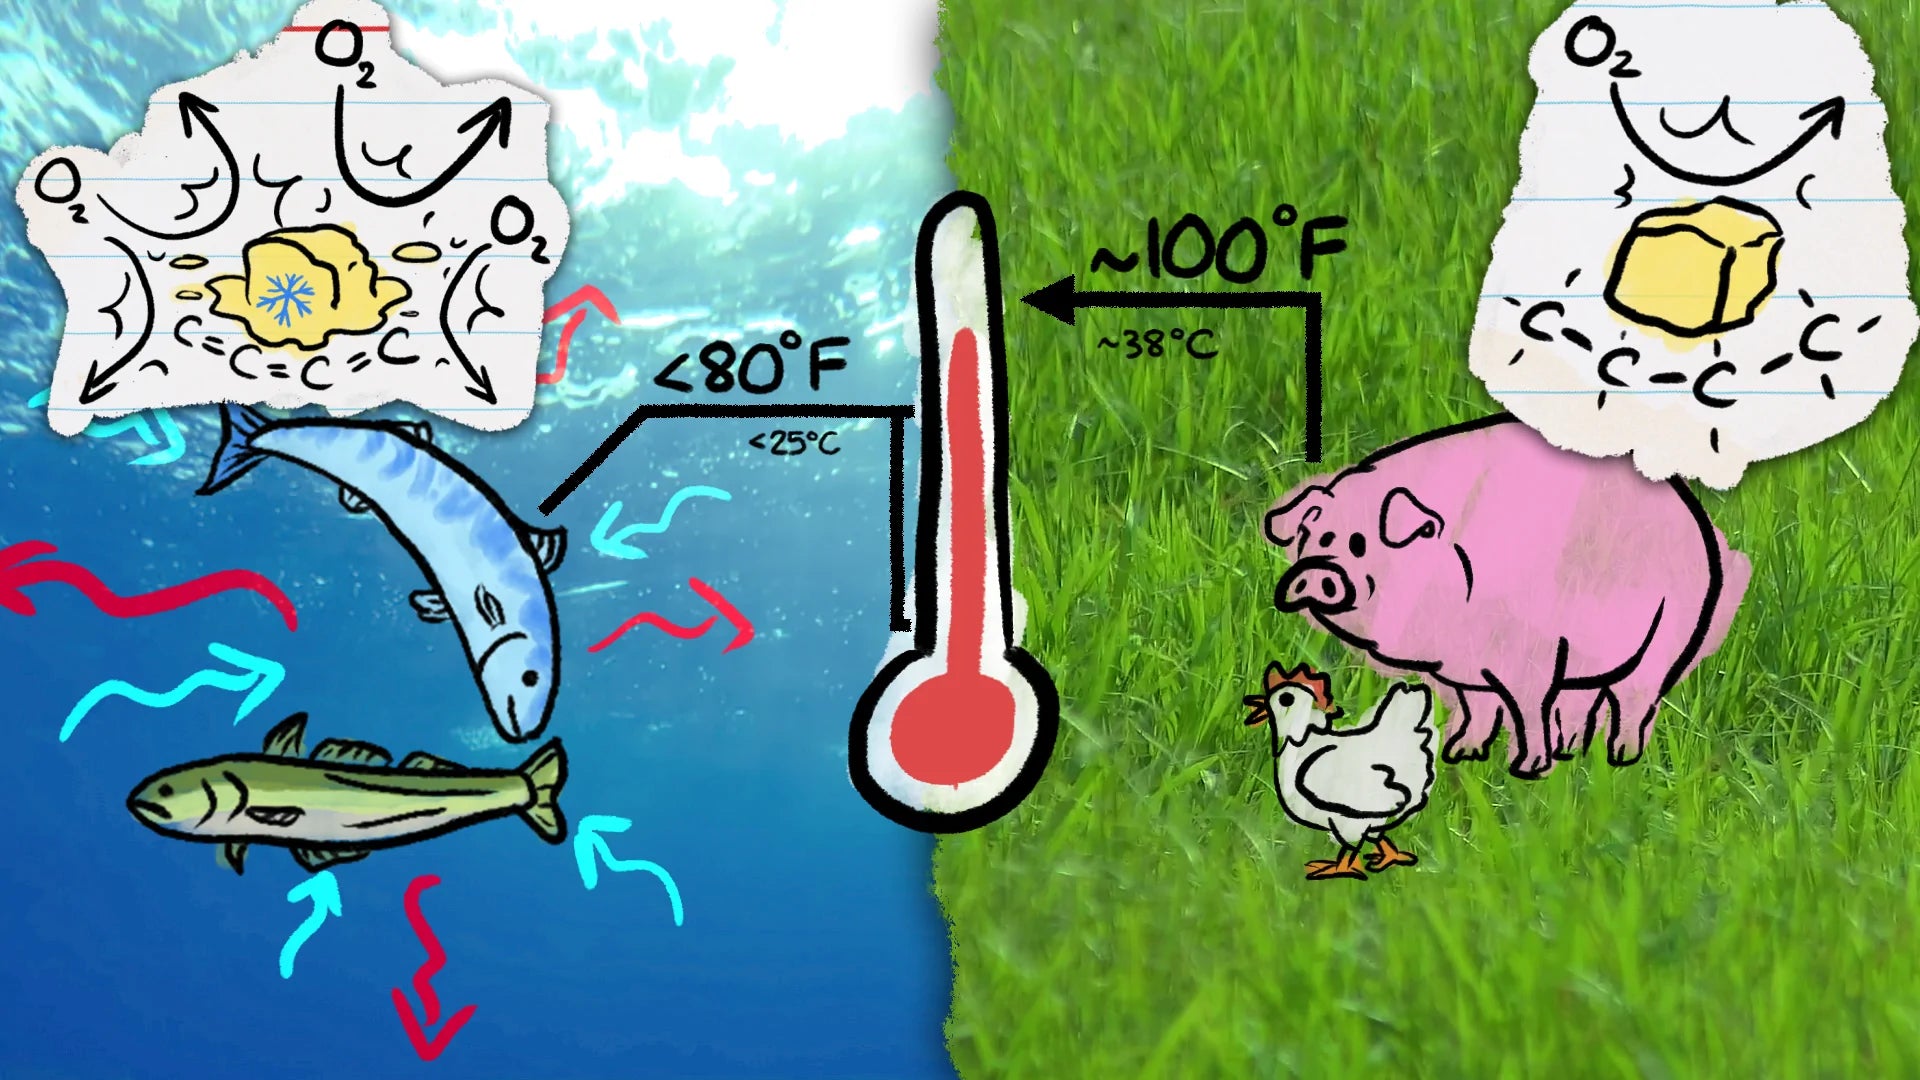 MinuteFood partnership illustration showing comparison between fish and meat